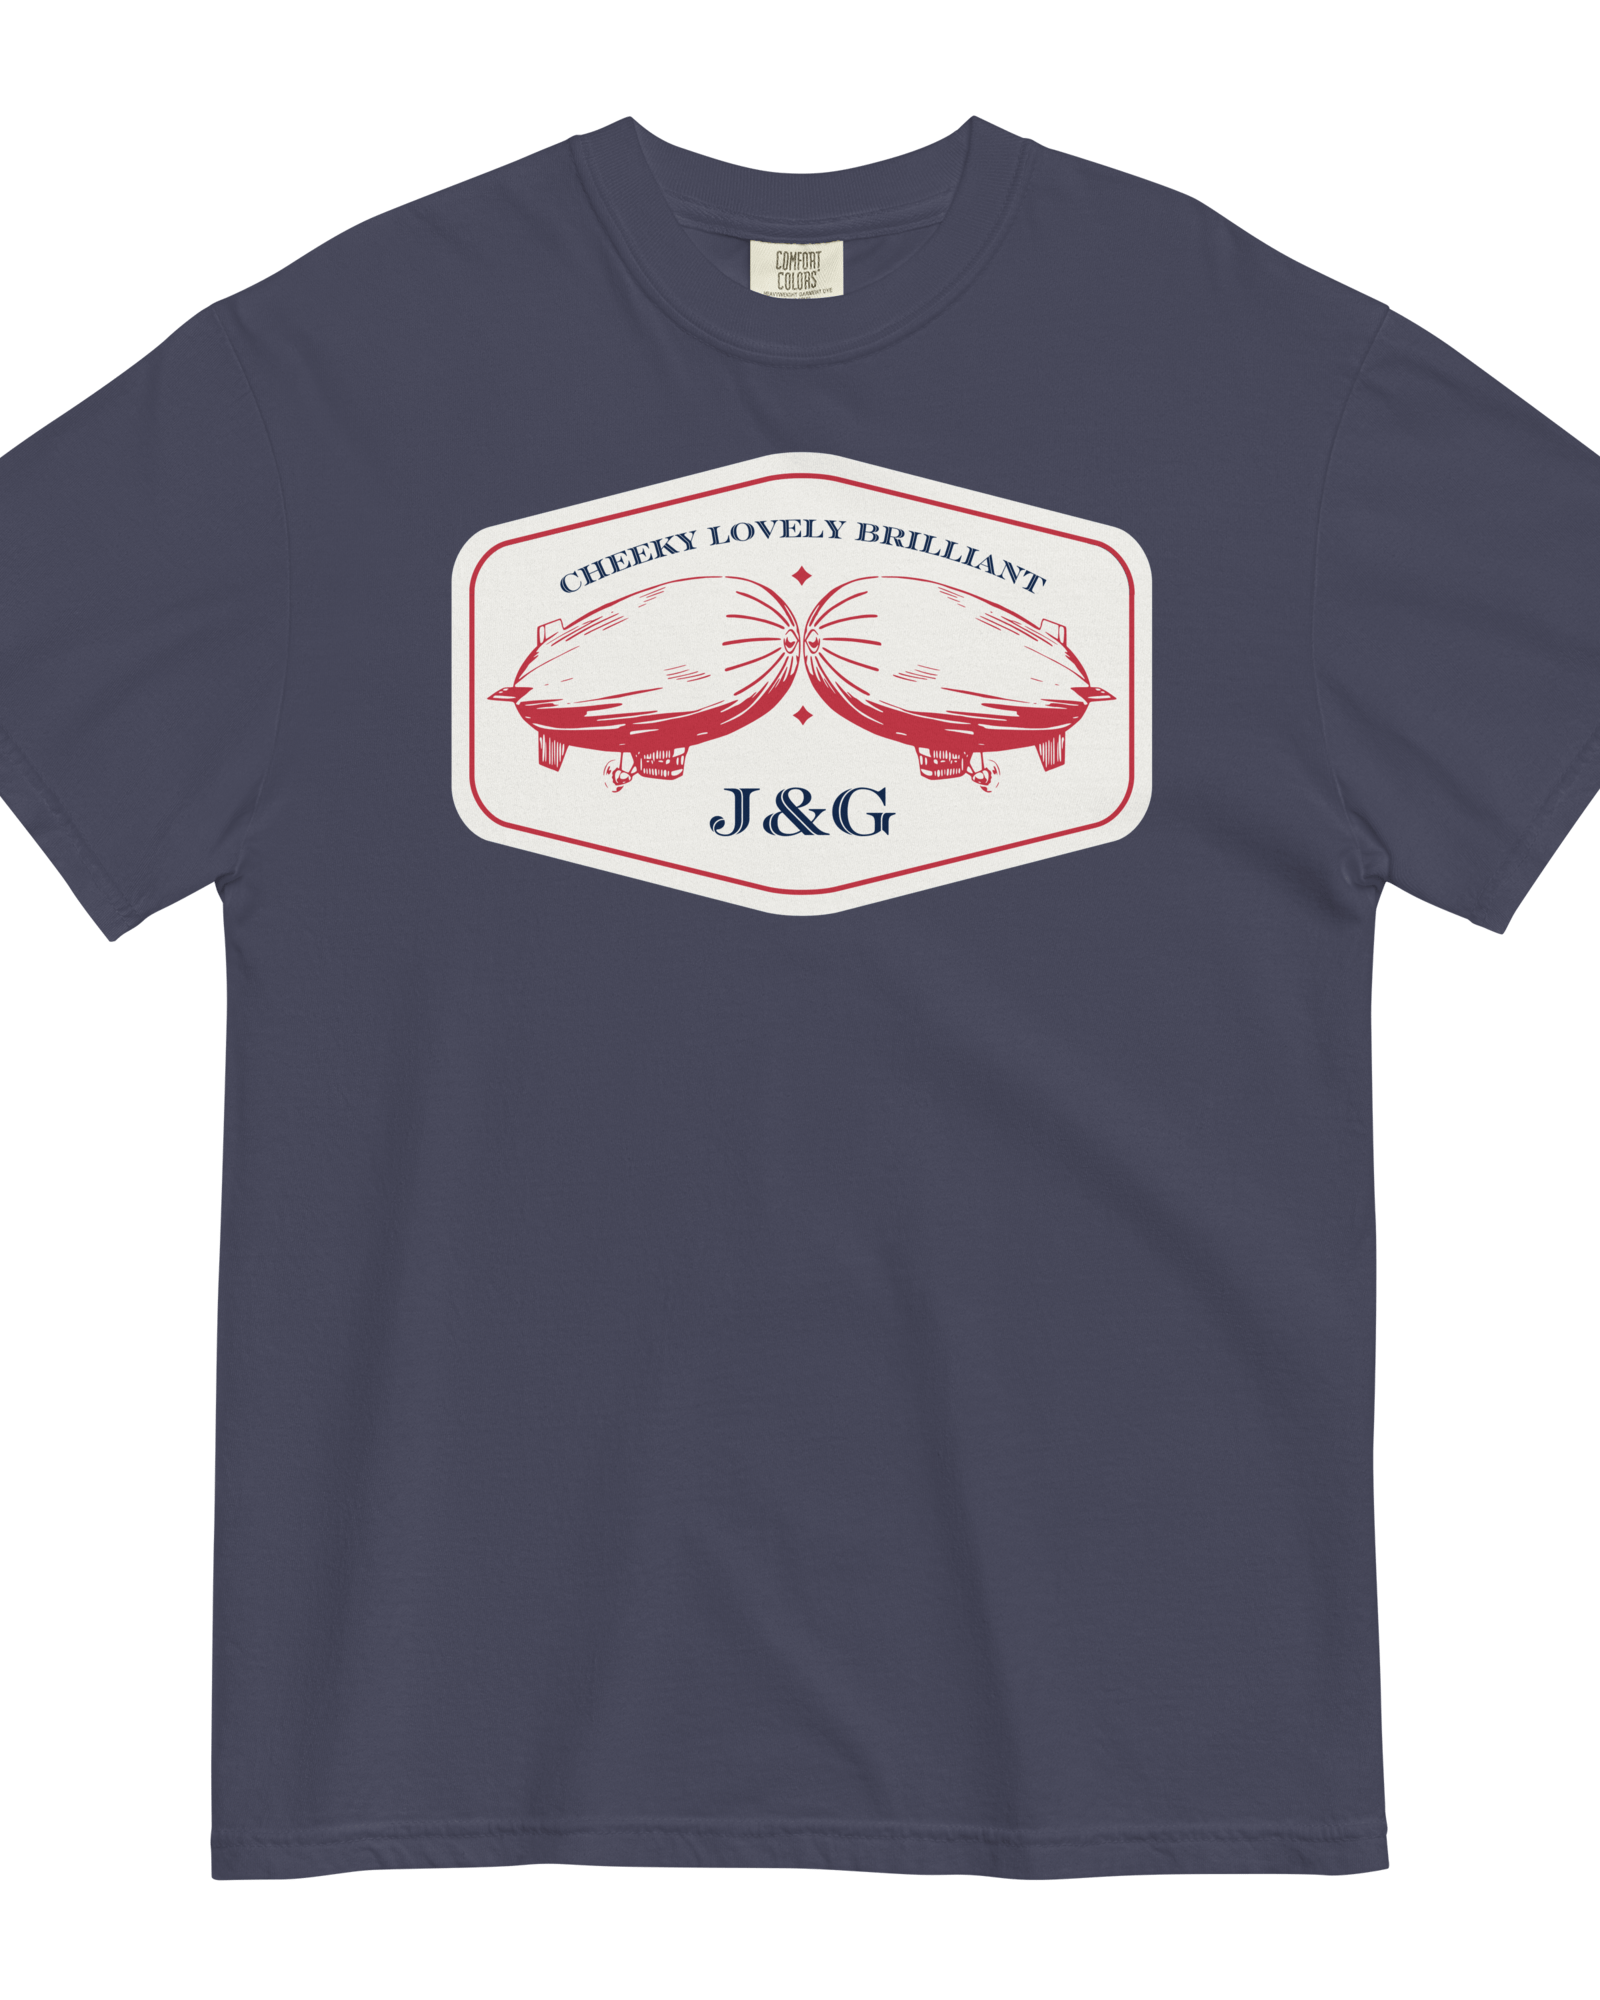 Cheeky Lovely Brilliant Airships T-shirt | Garment-Dyed Heavyweight Cotton True Navy / S Shirts & Tops Jolly & Goode